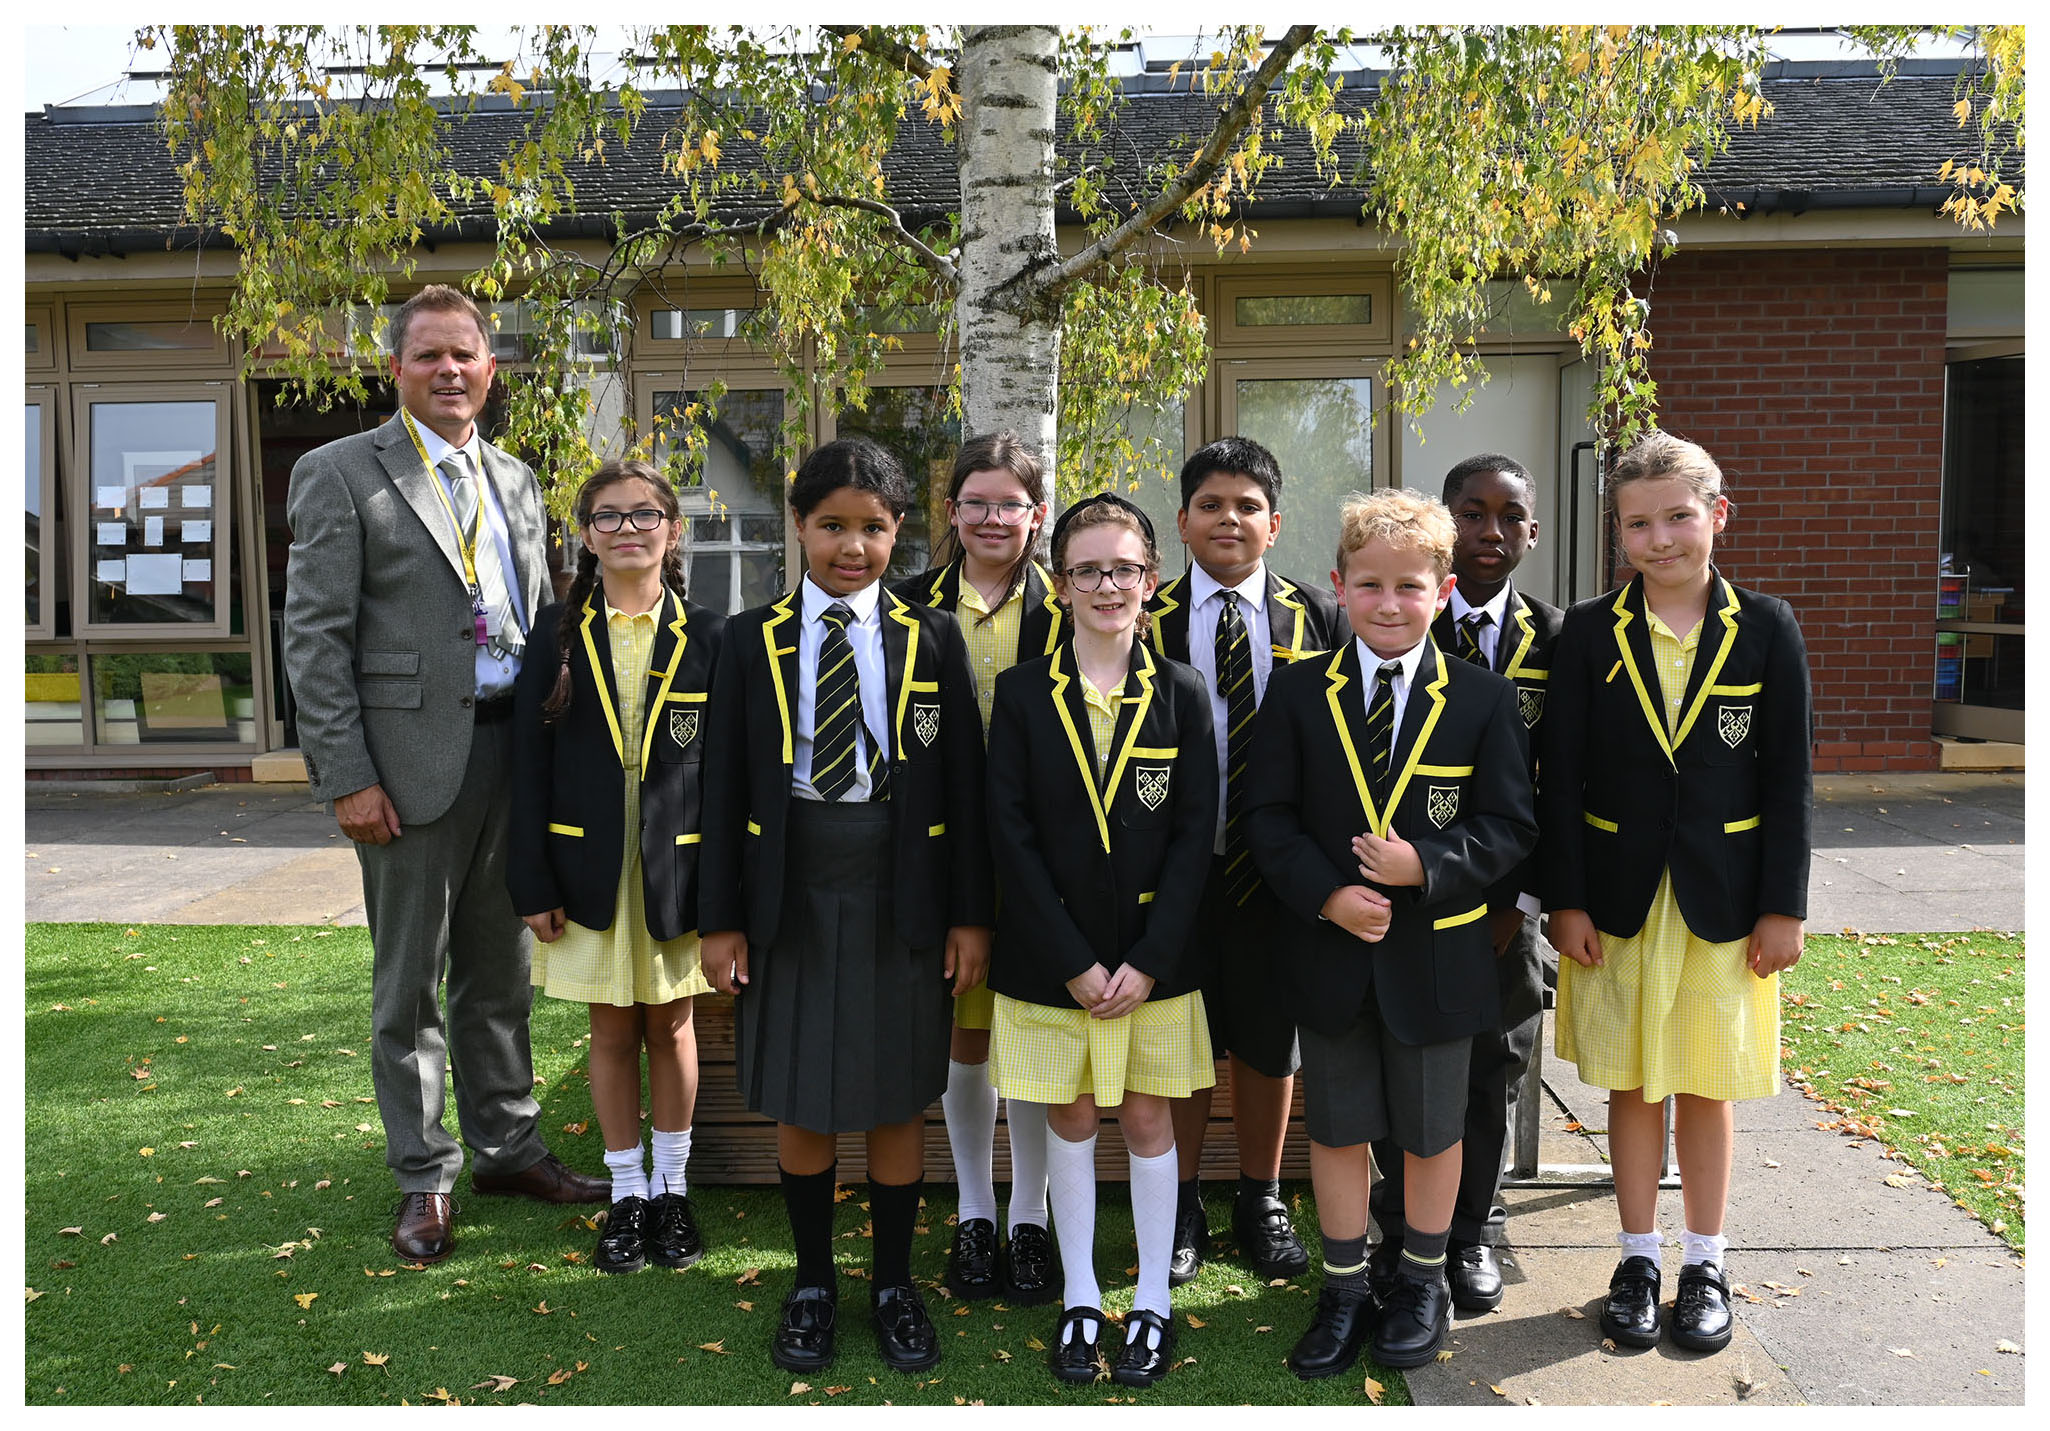 The Junior School House Captains pose for a photo with the Head